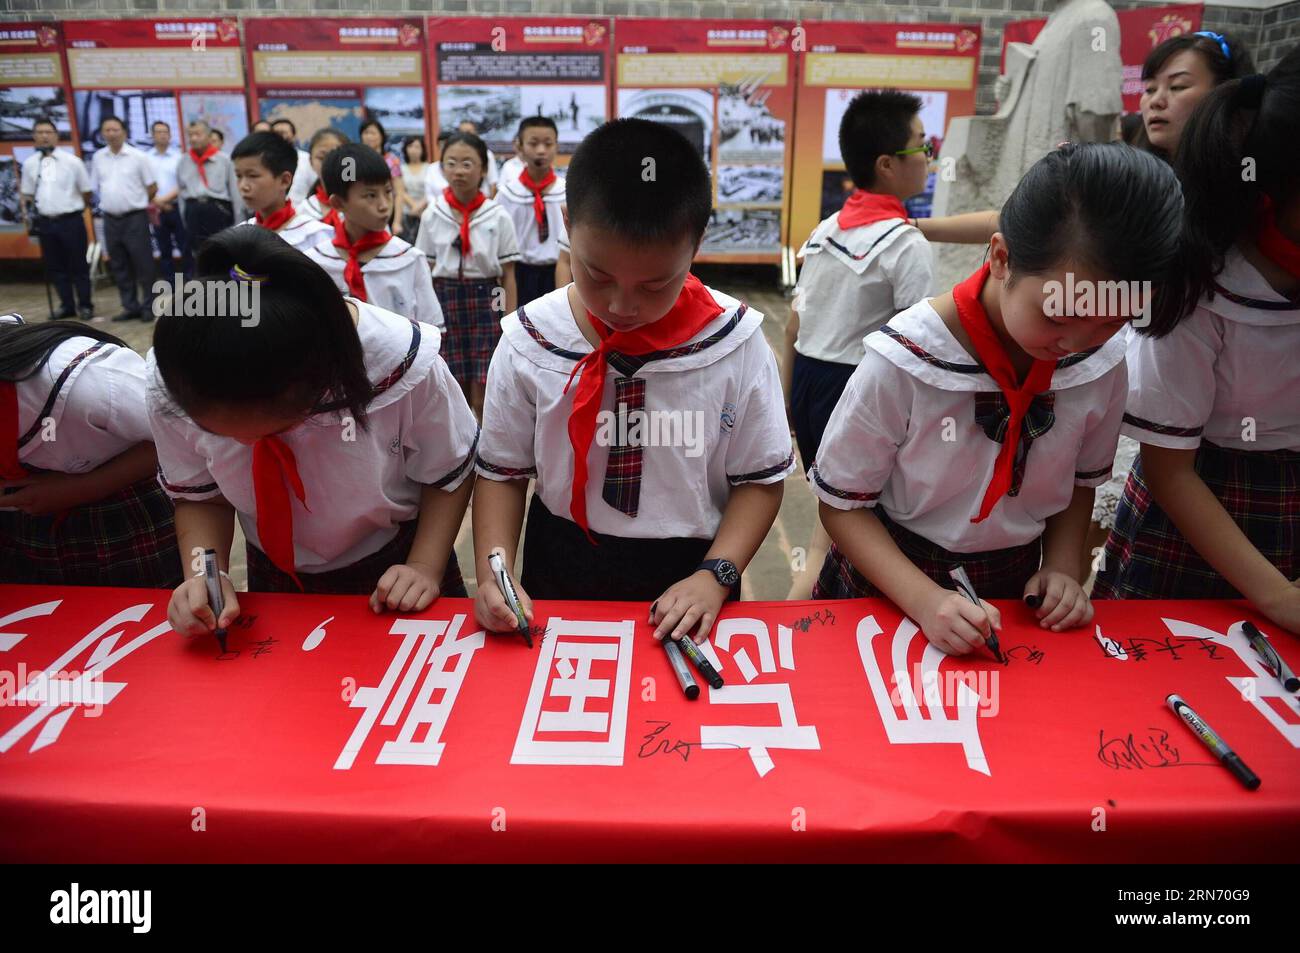 (150812) -- NANCHANG, Aug. 12, 2015 -- Pupils sign their names on a banner while visiting the former residence of Mei Ru ao, the Chinese judge at the International Military Tribunal for the Far East, during an activity marking the 70th anniversary of victory in the Chinese People s War of Resistance Against Japanese Aggression in Qingyunpu District of Nanchang, east China s Jiangxi Province, Aug. 12, 2015. ) (xcf) CHINA-JIANGXI-NANCHANG-COMMEMORATION-ACTIVITY (CN) ZhouxMi PUBLICATIONxNOTxINxCHN   150812 Nanchang Aug 12 2015 Pupils Sign their Names ON a Banner while Visiting The Former Residenc Stock Photo